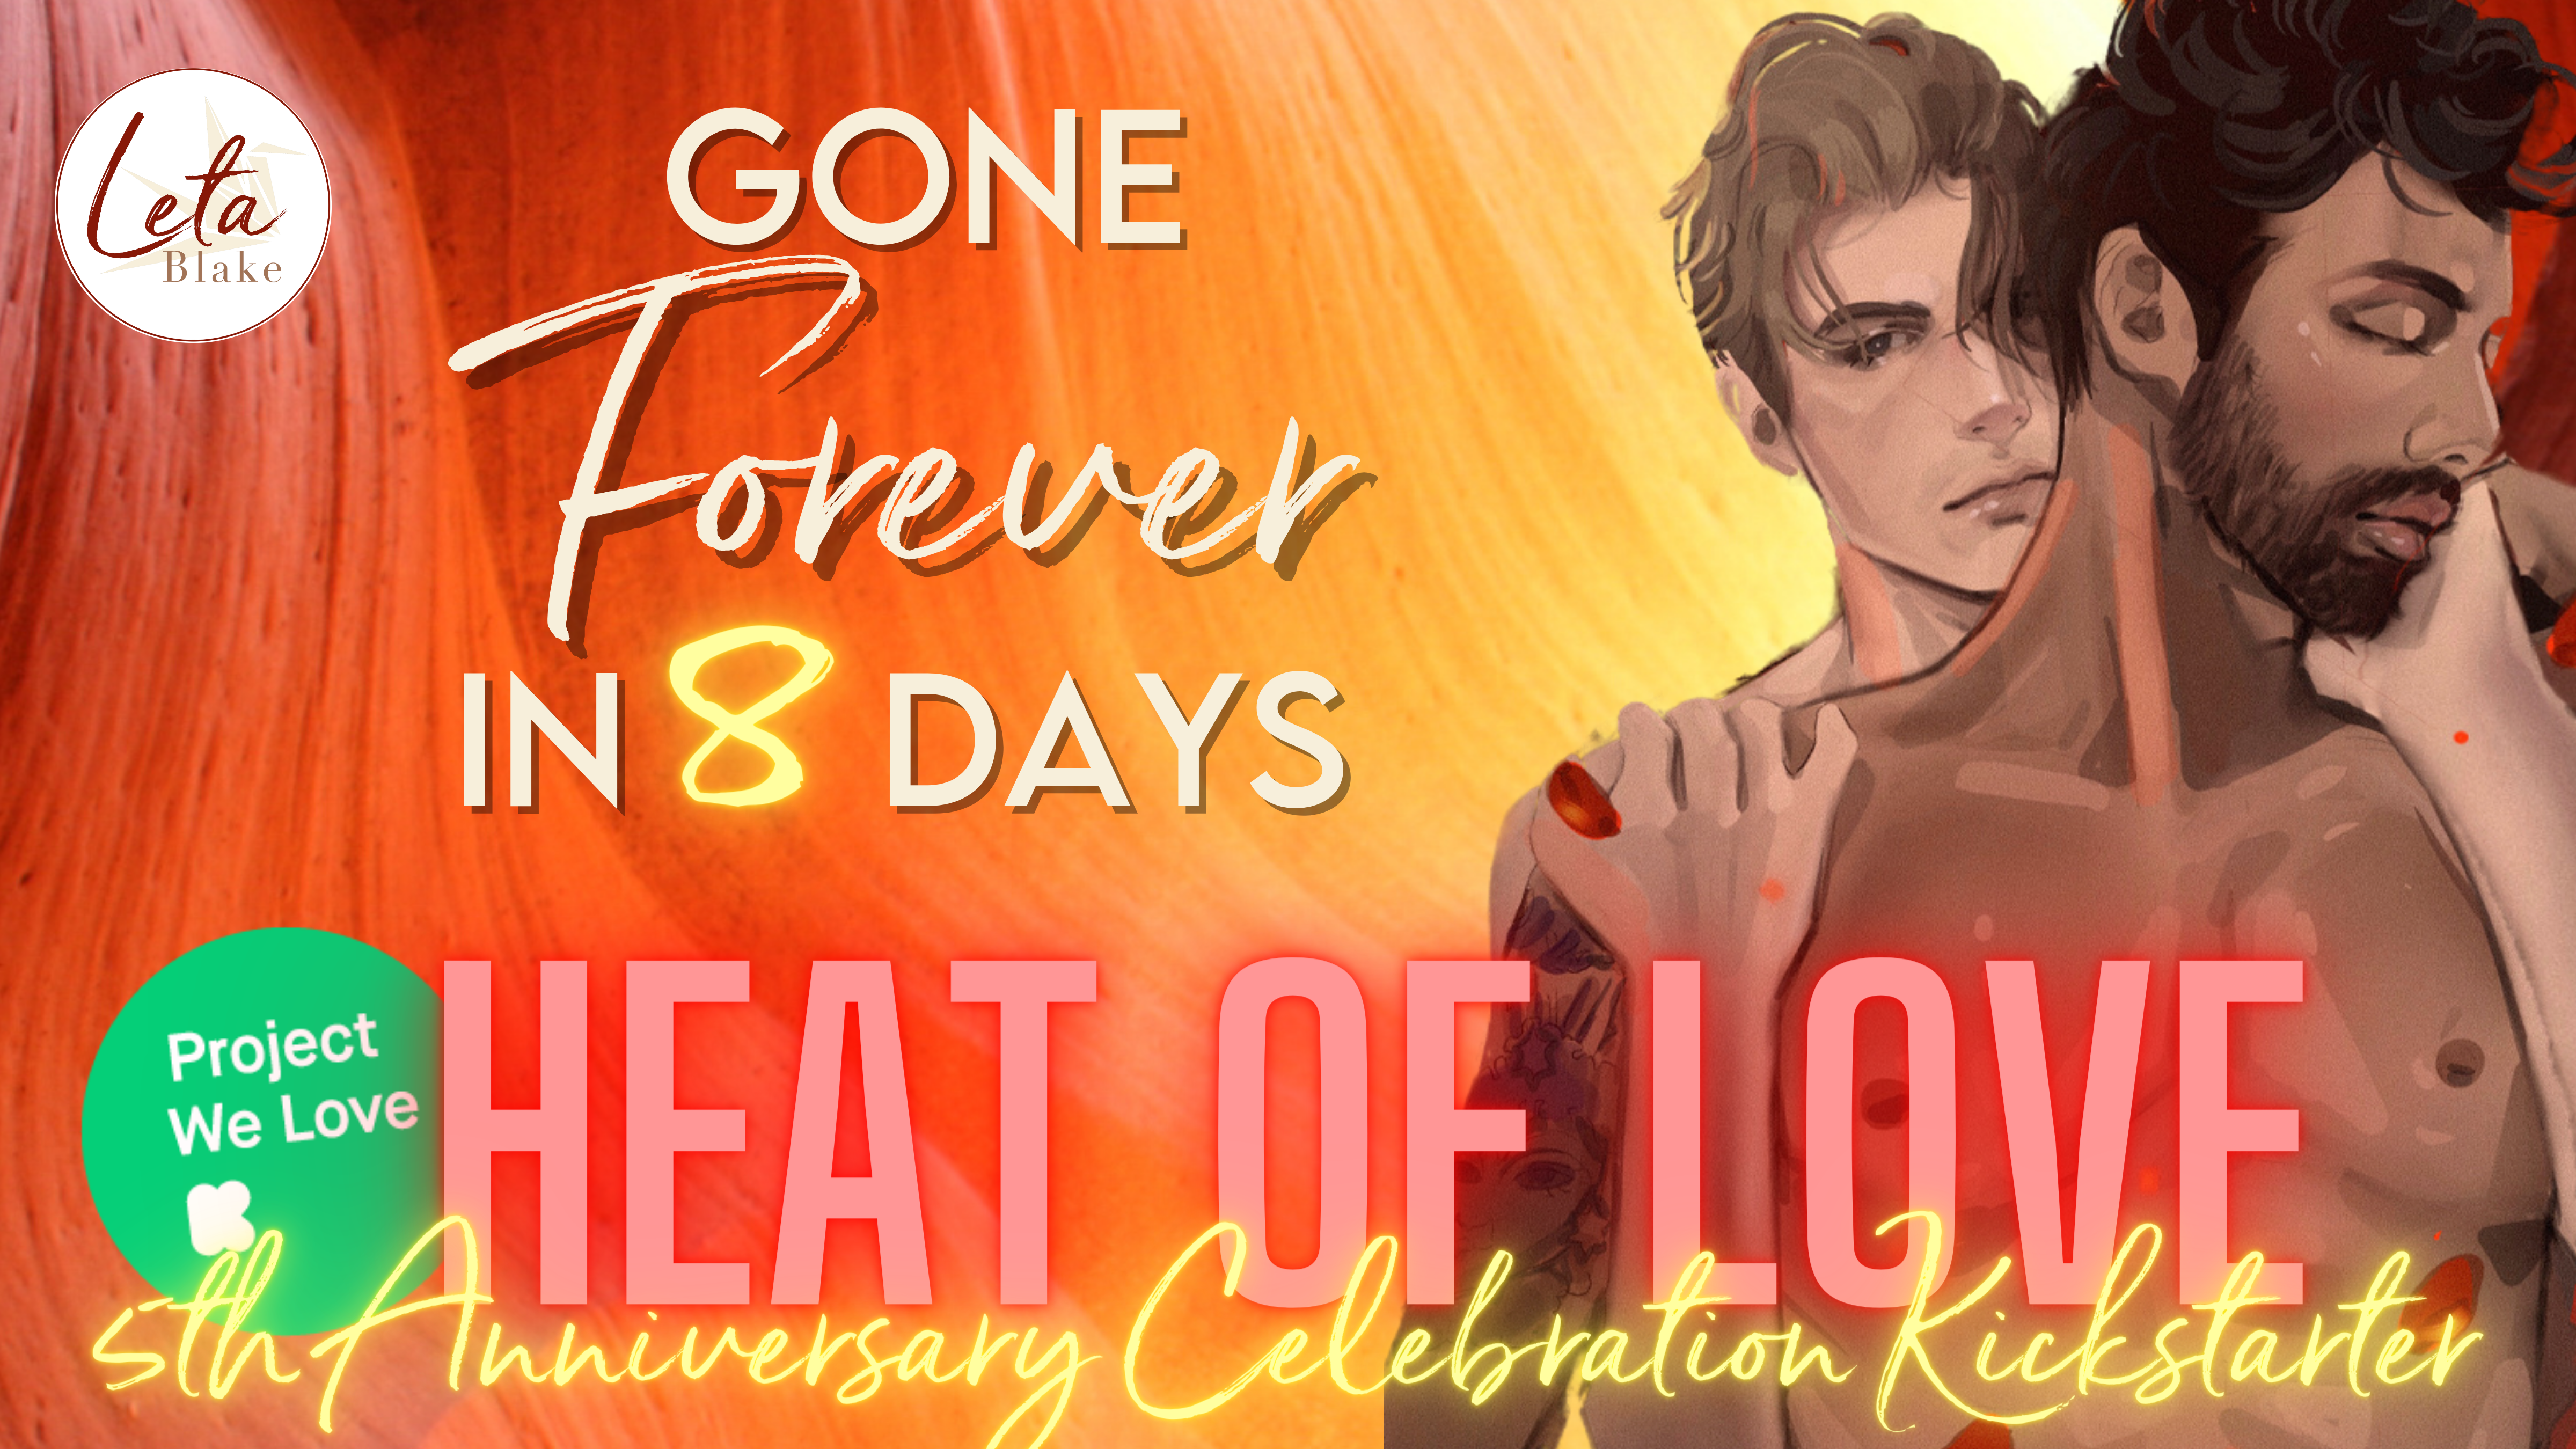 Two artist rendered men embracing on an orange to yellow ombre background. Text says "Gone Forever in 8 days", "Heat of Love", and "5th Anniversary Celebration Kickstarter"